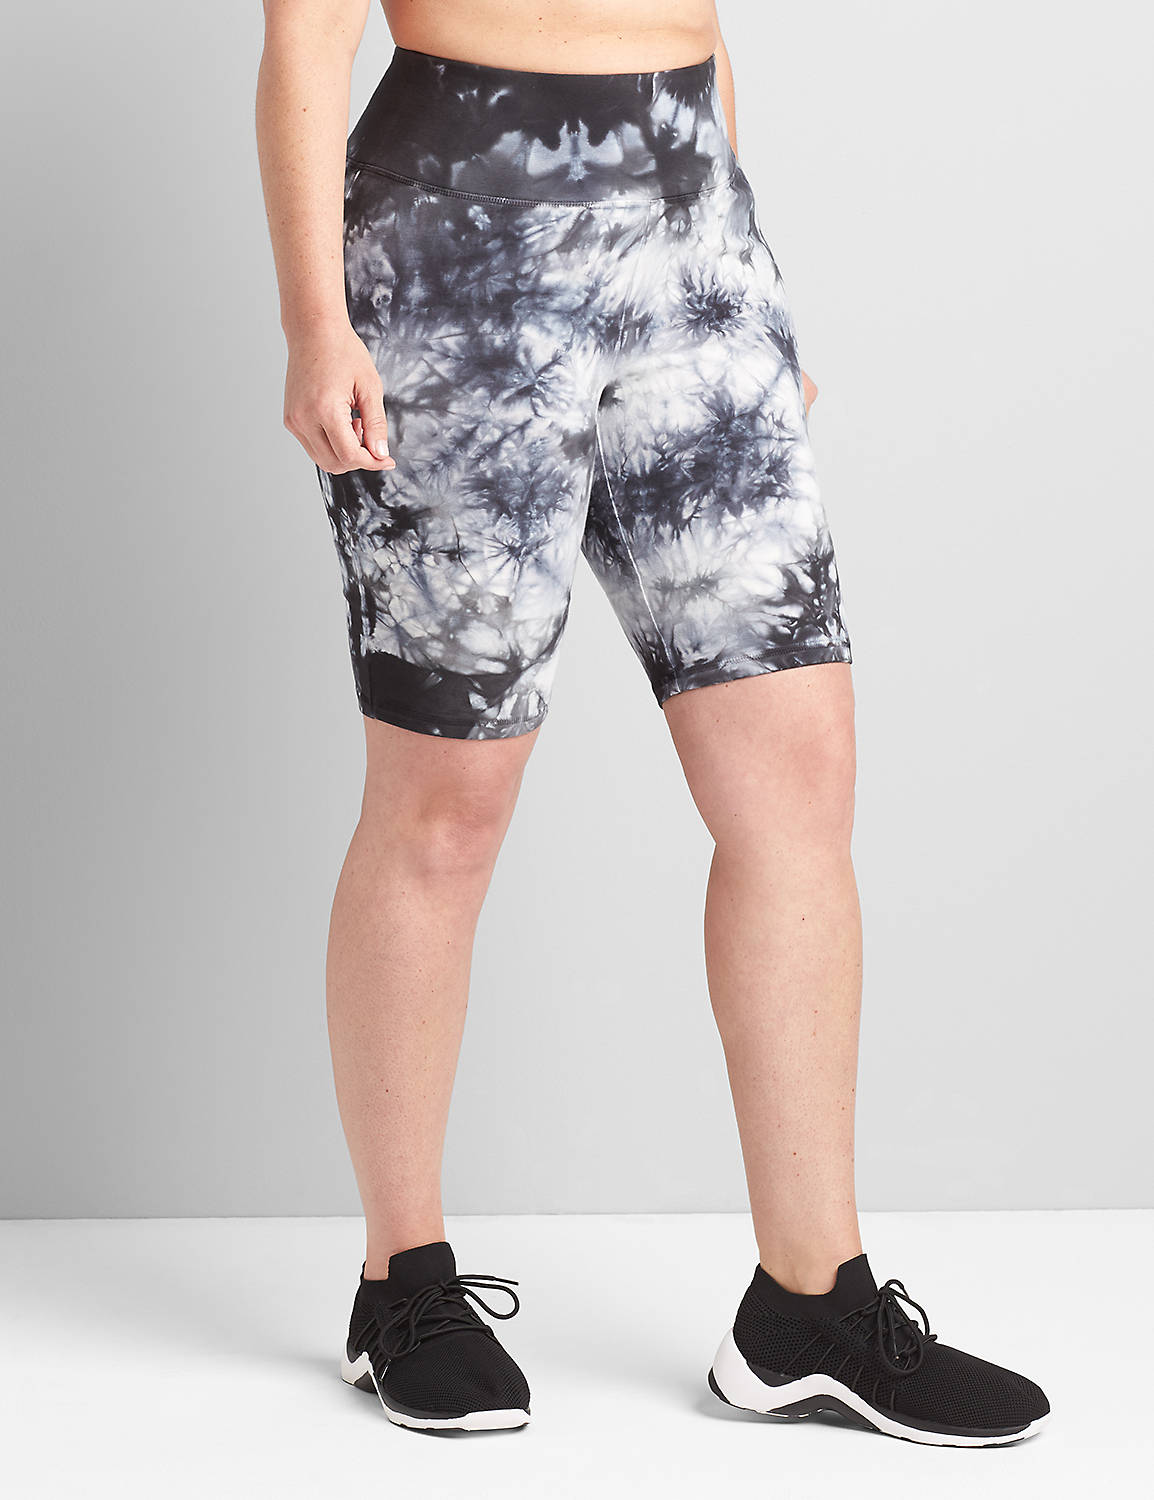 Power Signature Stretch Knee Short Product Image 1